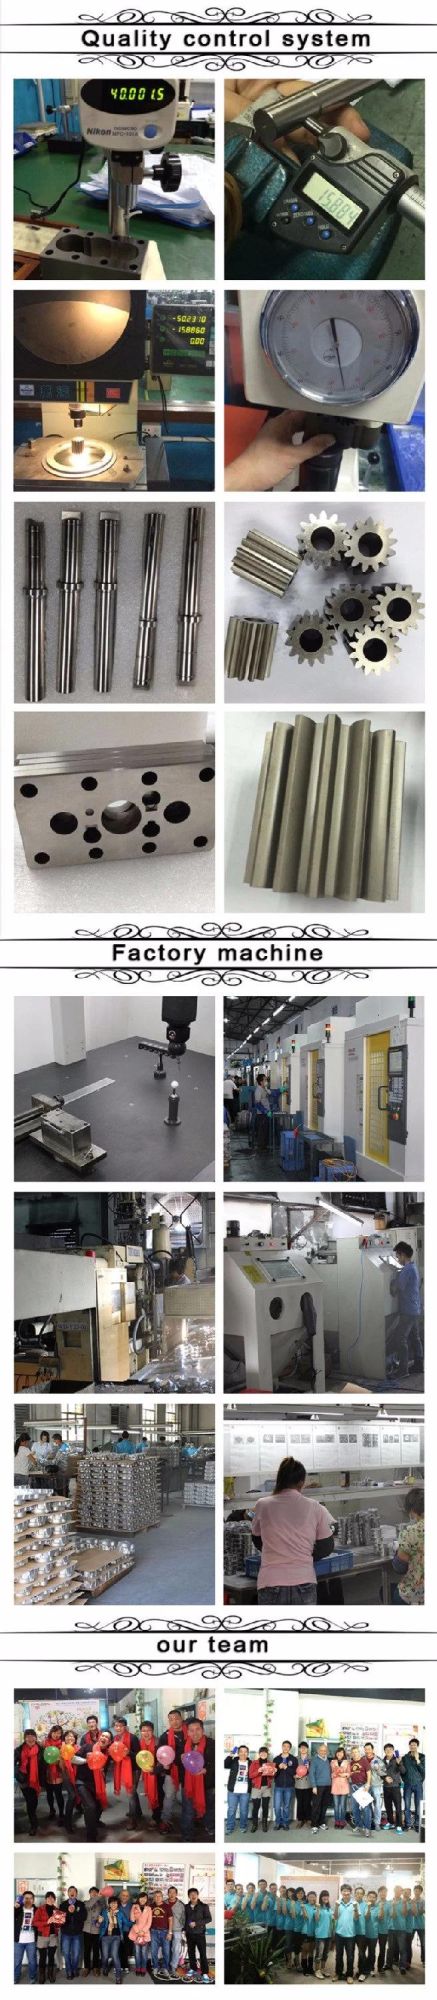 Die Casting Part of China High Precision